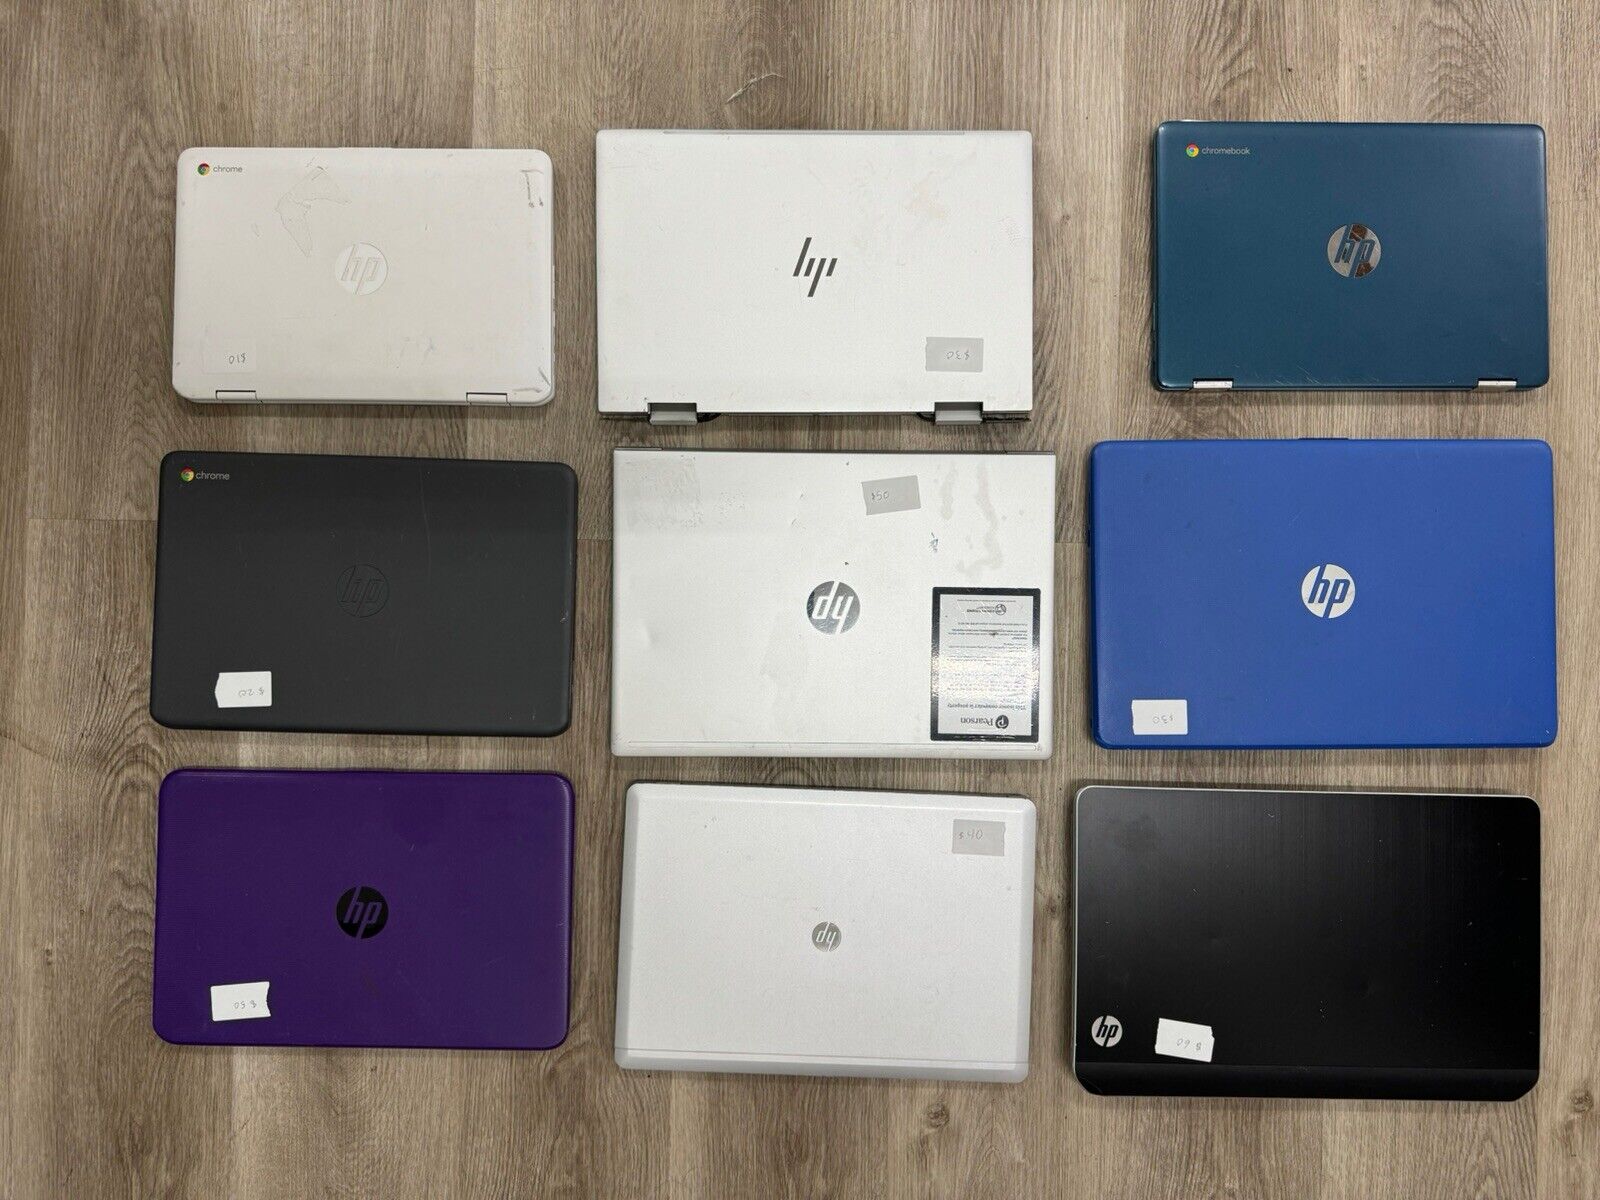 LOT OF 9 HP LAPTOPS FOR PARTS UNTESTED - DAMAGE, NO CHARGERS/ACCESSORIES